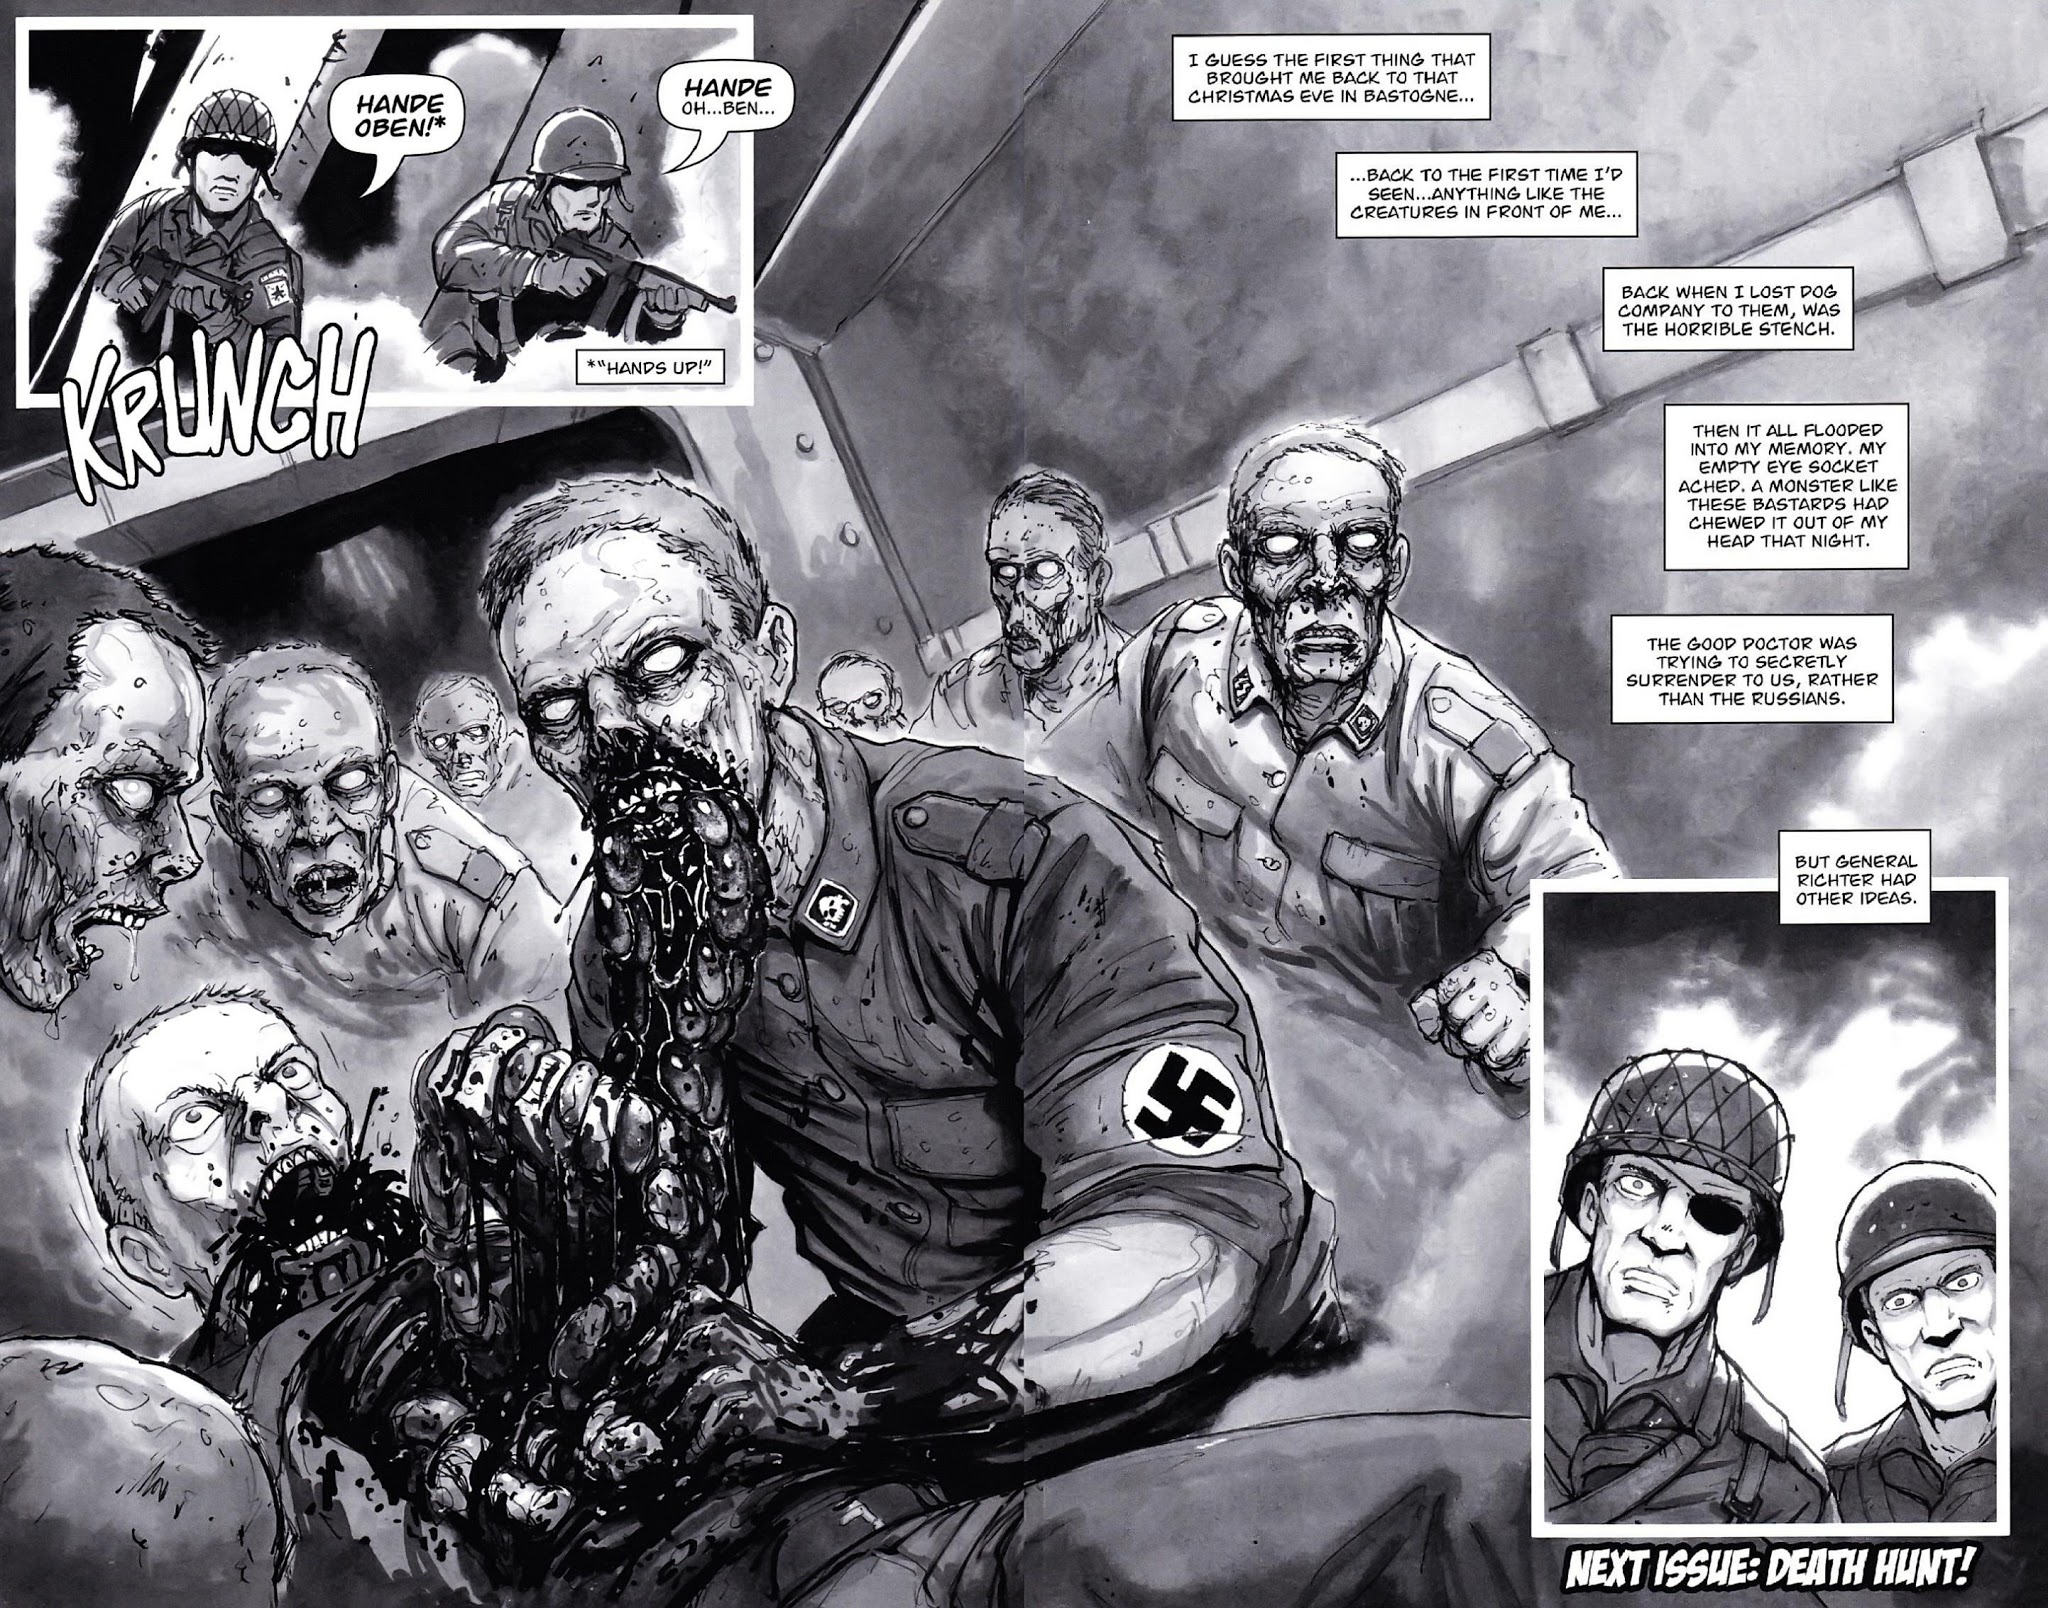 Nazi Dog Porn - Nazi Zombies Issue Read Nazi Zombies Issue Comic Online In HighSexiezPix  Web Porn